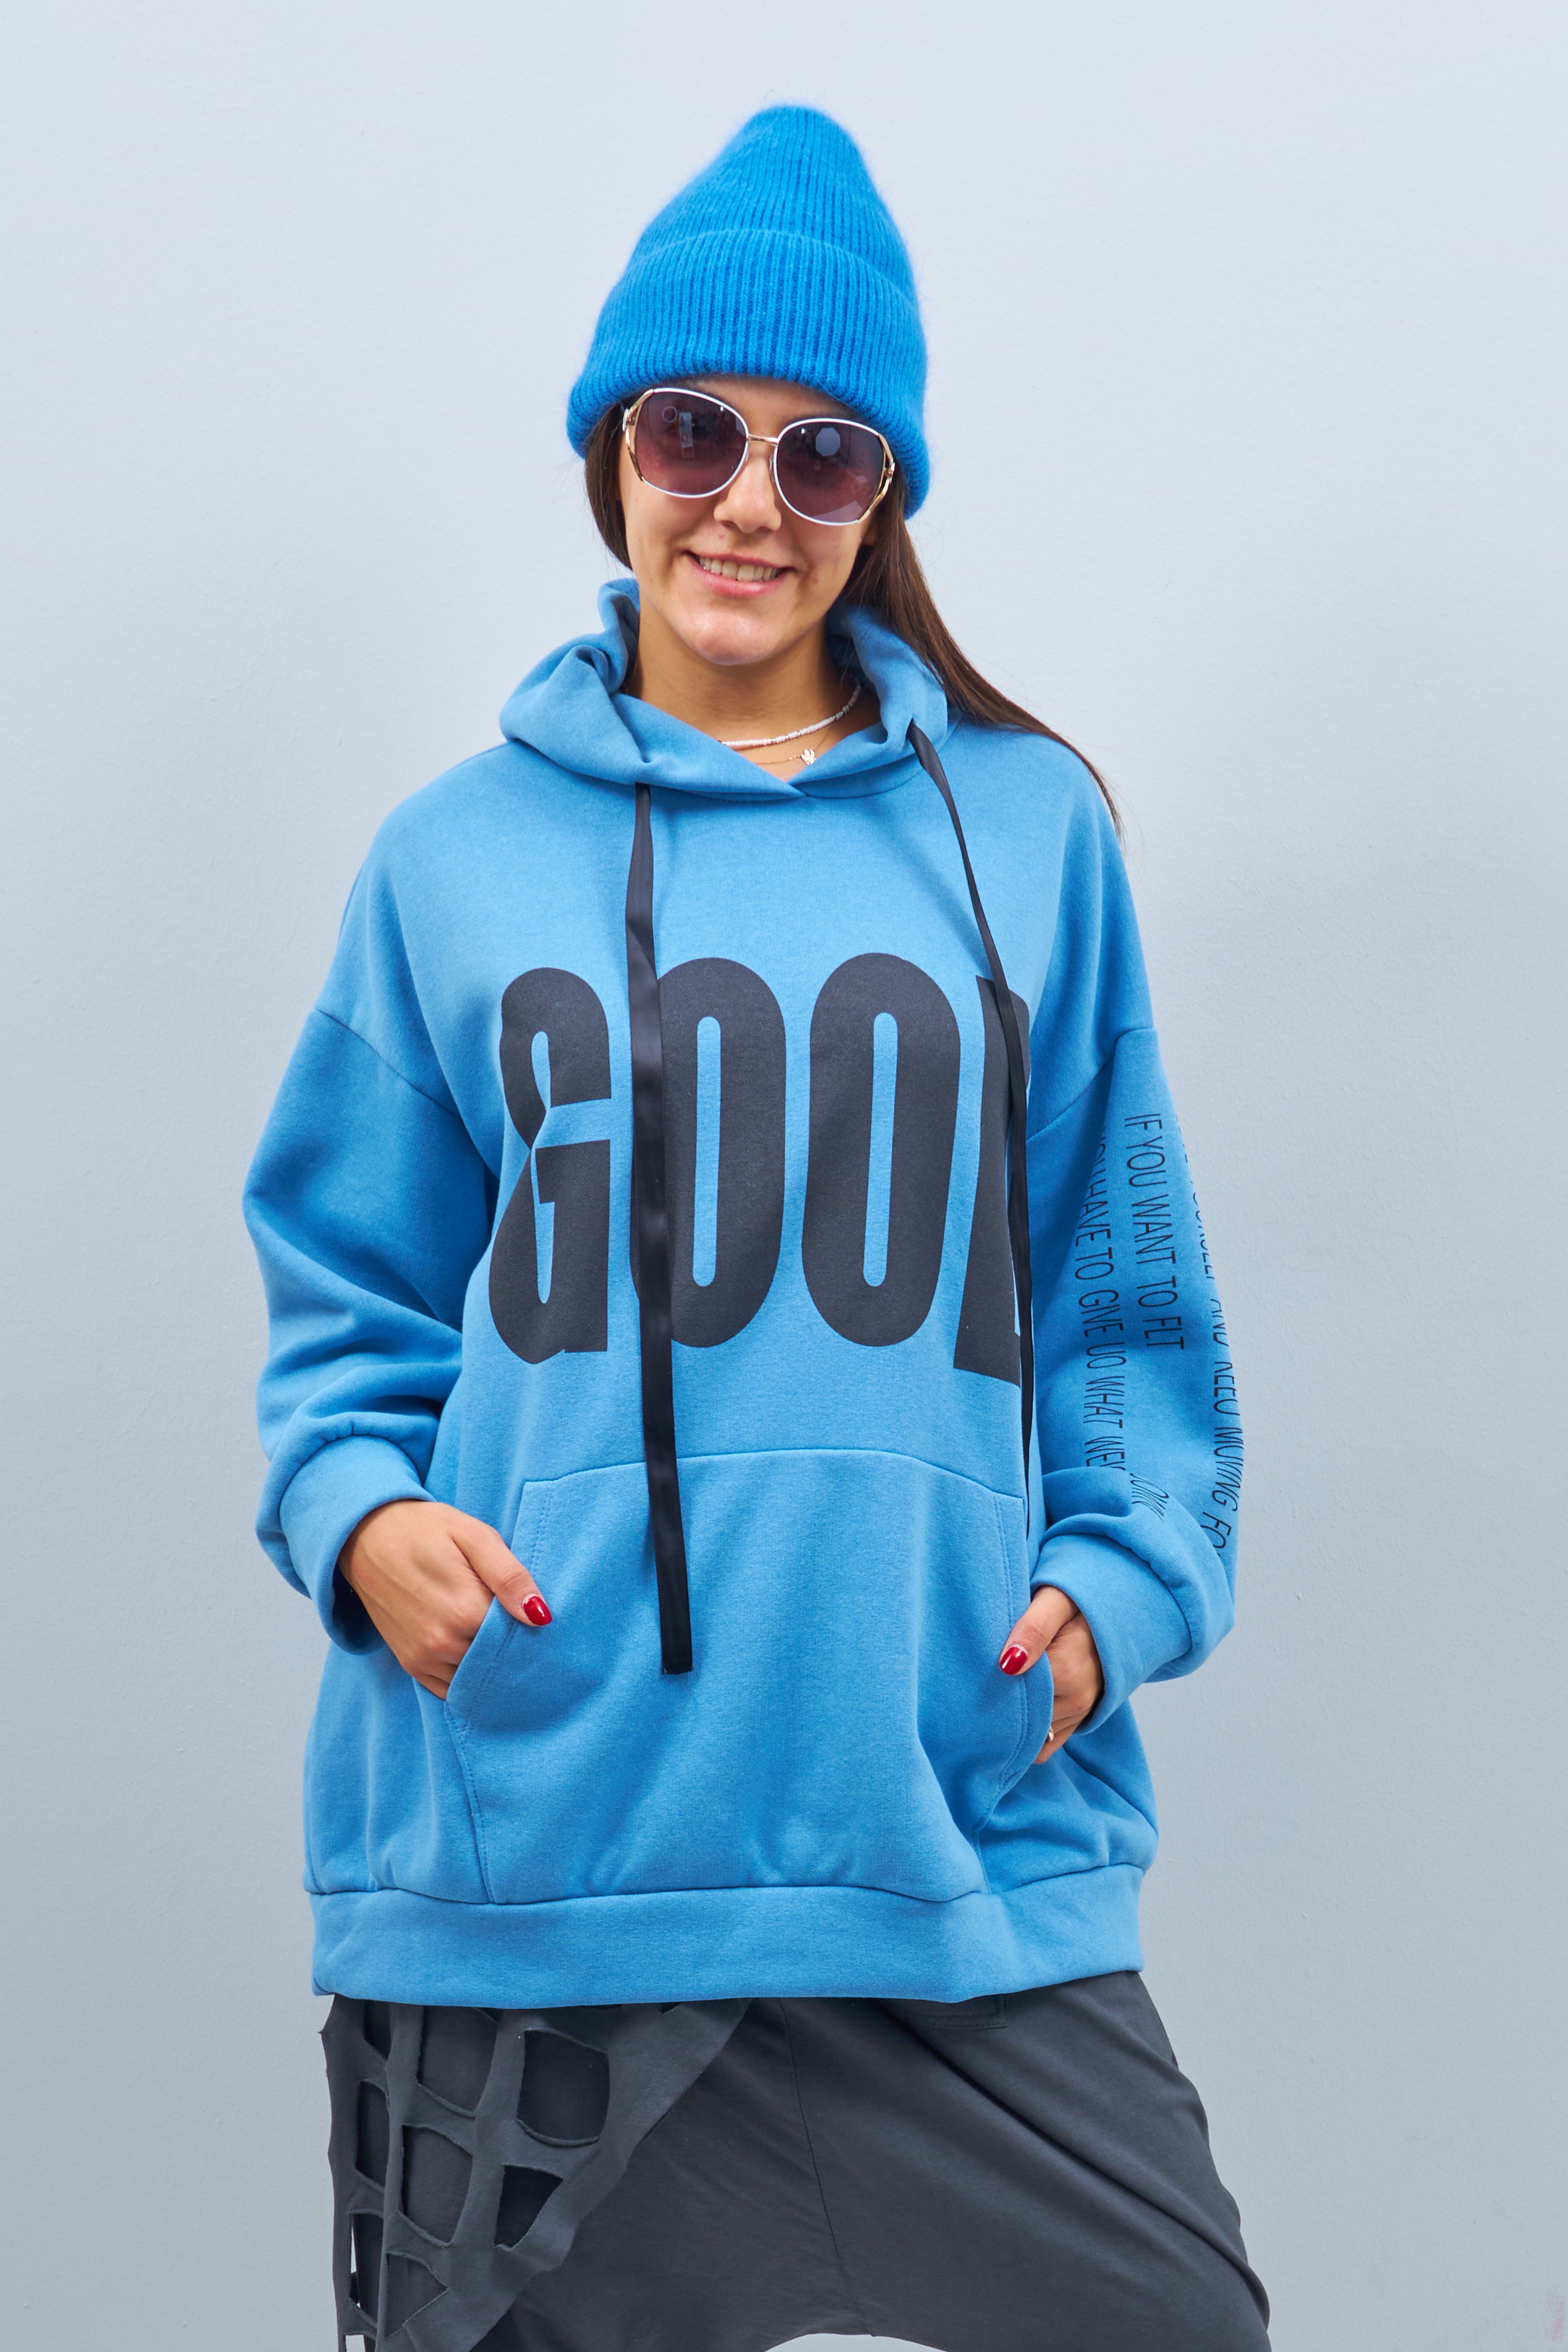 Oversized hoodie with GOOD lettering, blue